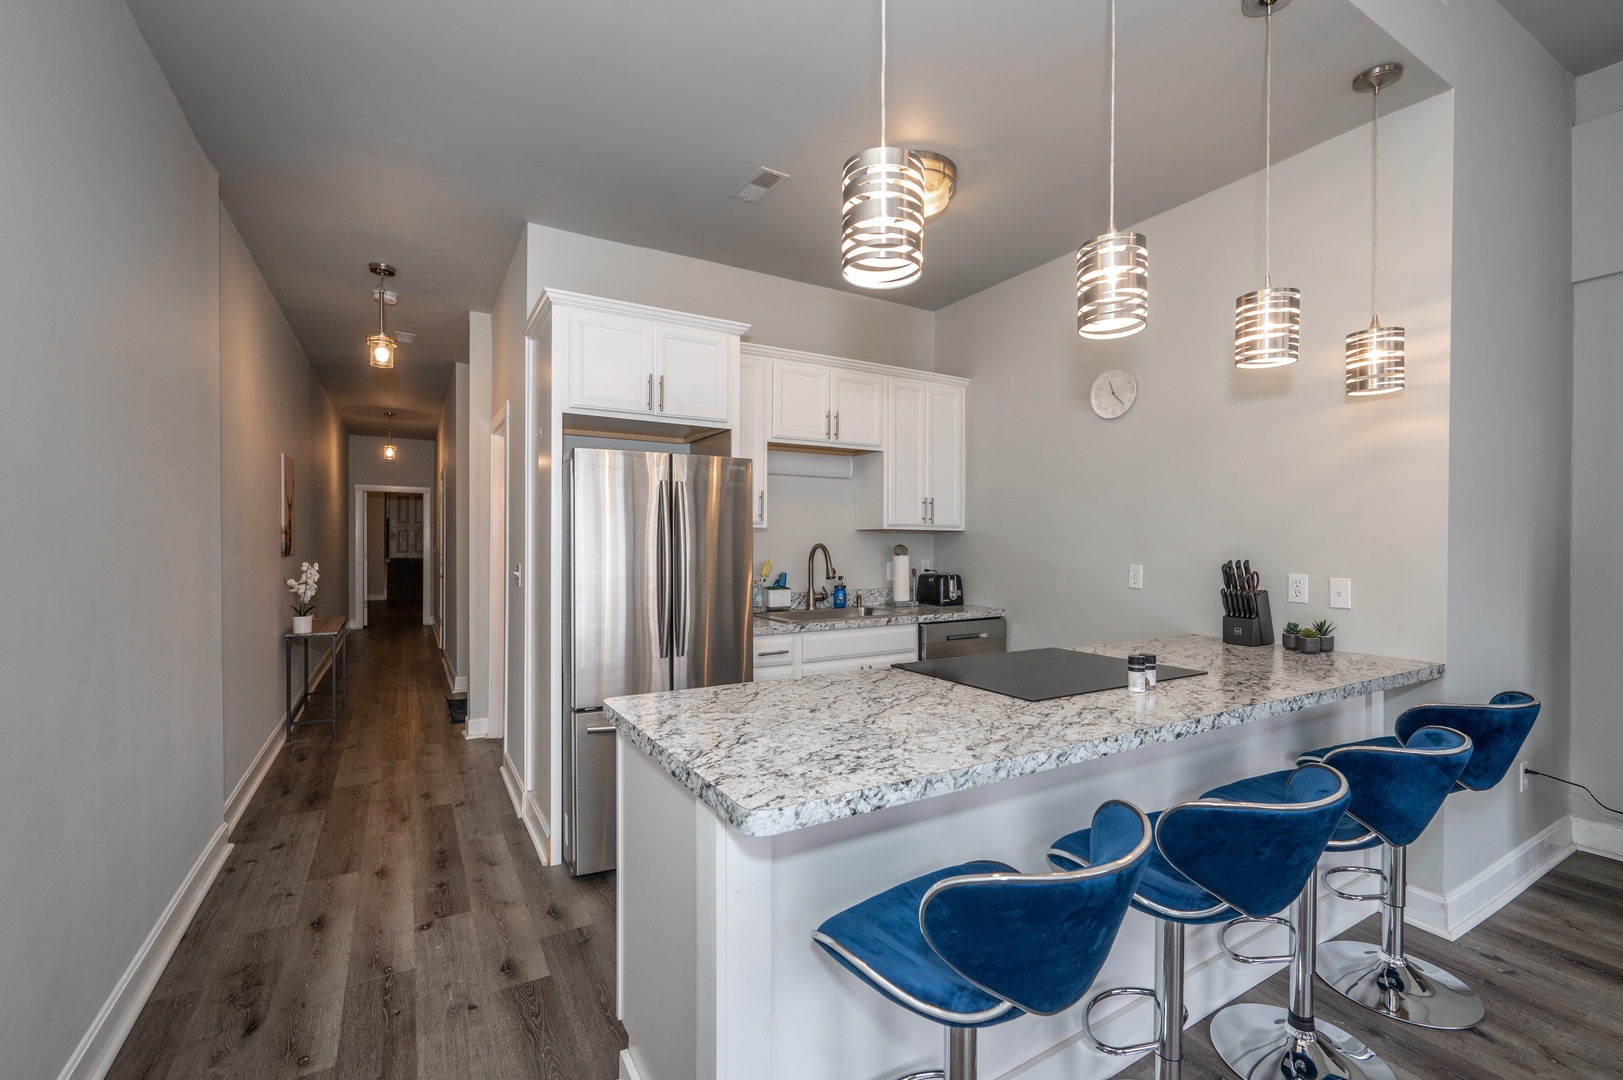 Unit 2: Enjoy meals or a drink at the kitchen counter, offering seating for 4